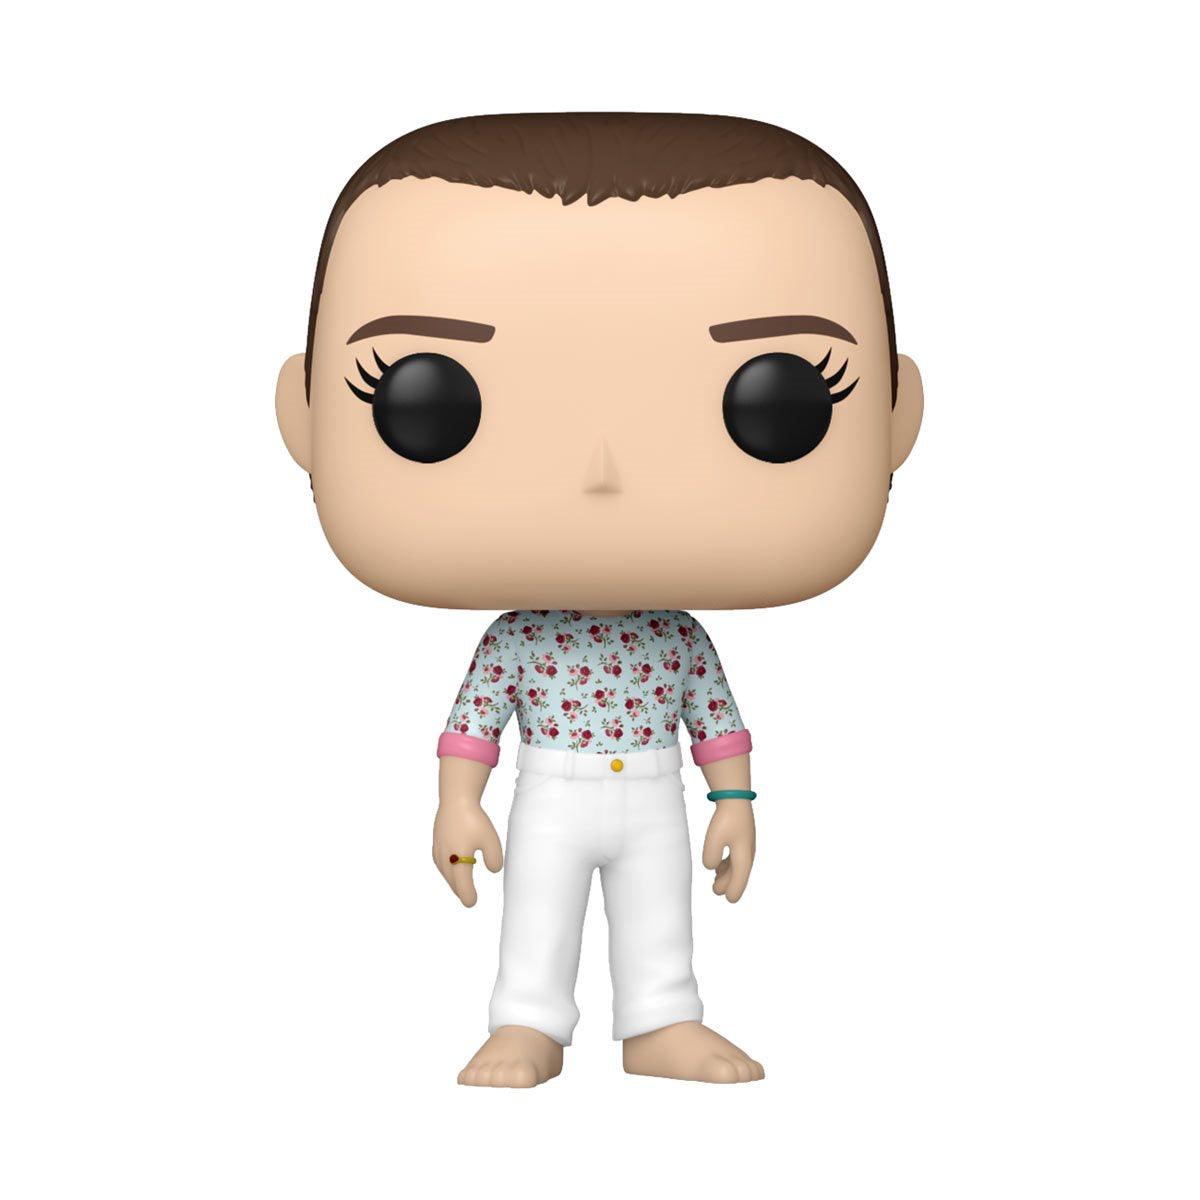 FUNKO POP! TELEVISION: Stranger Things - Eleven